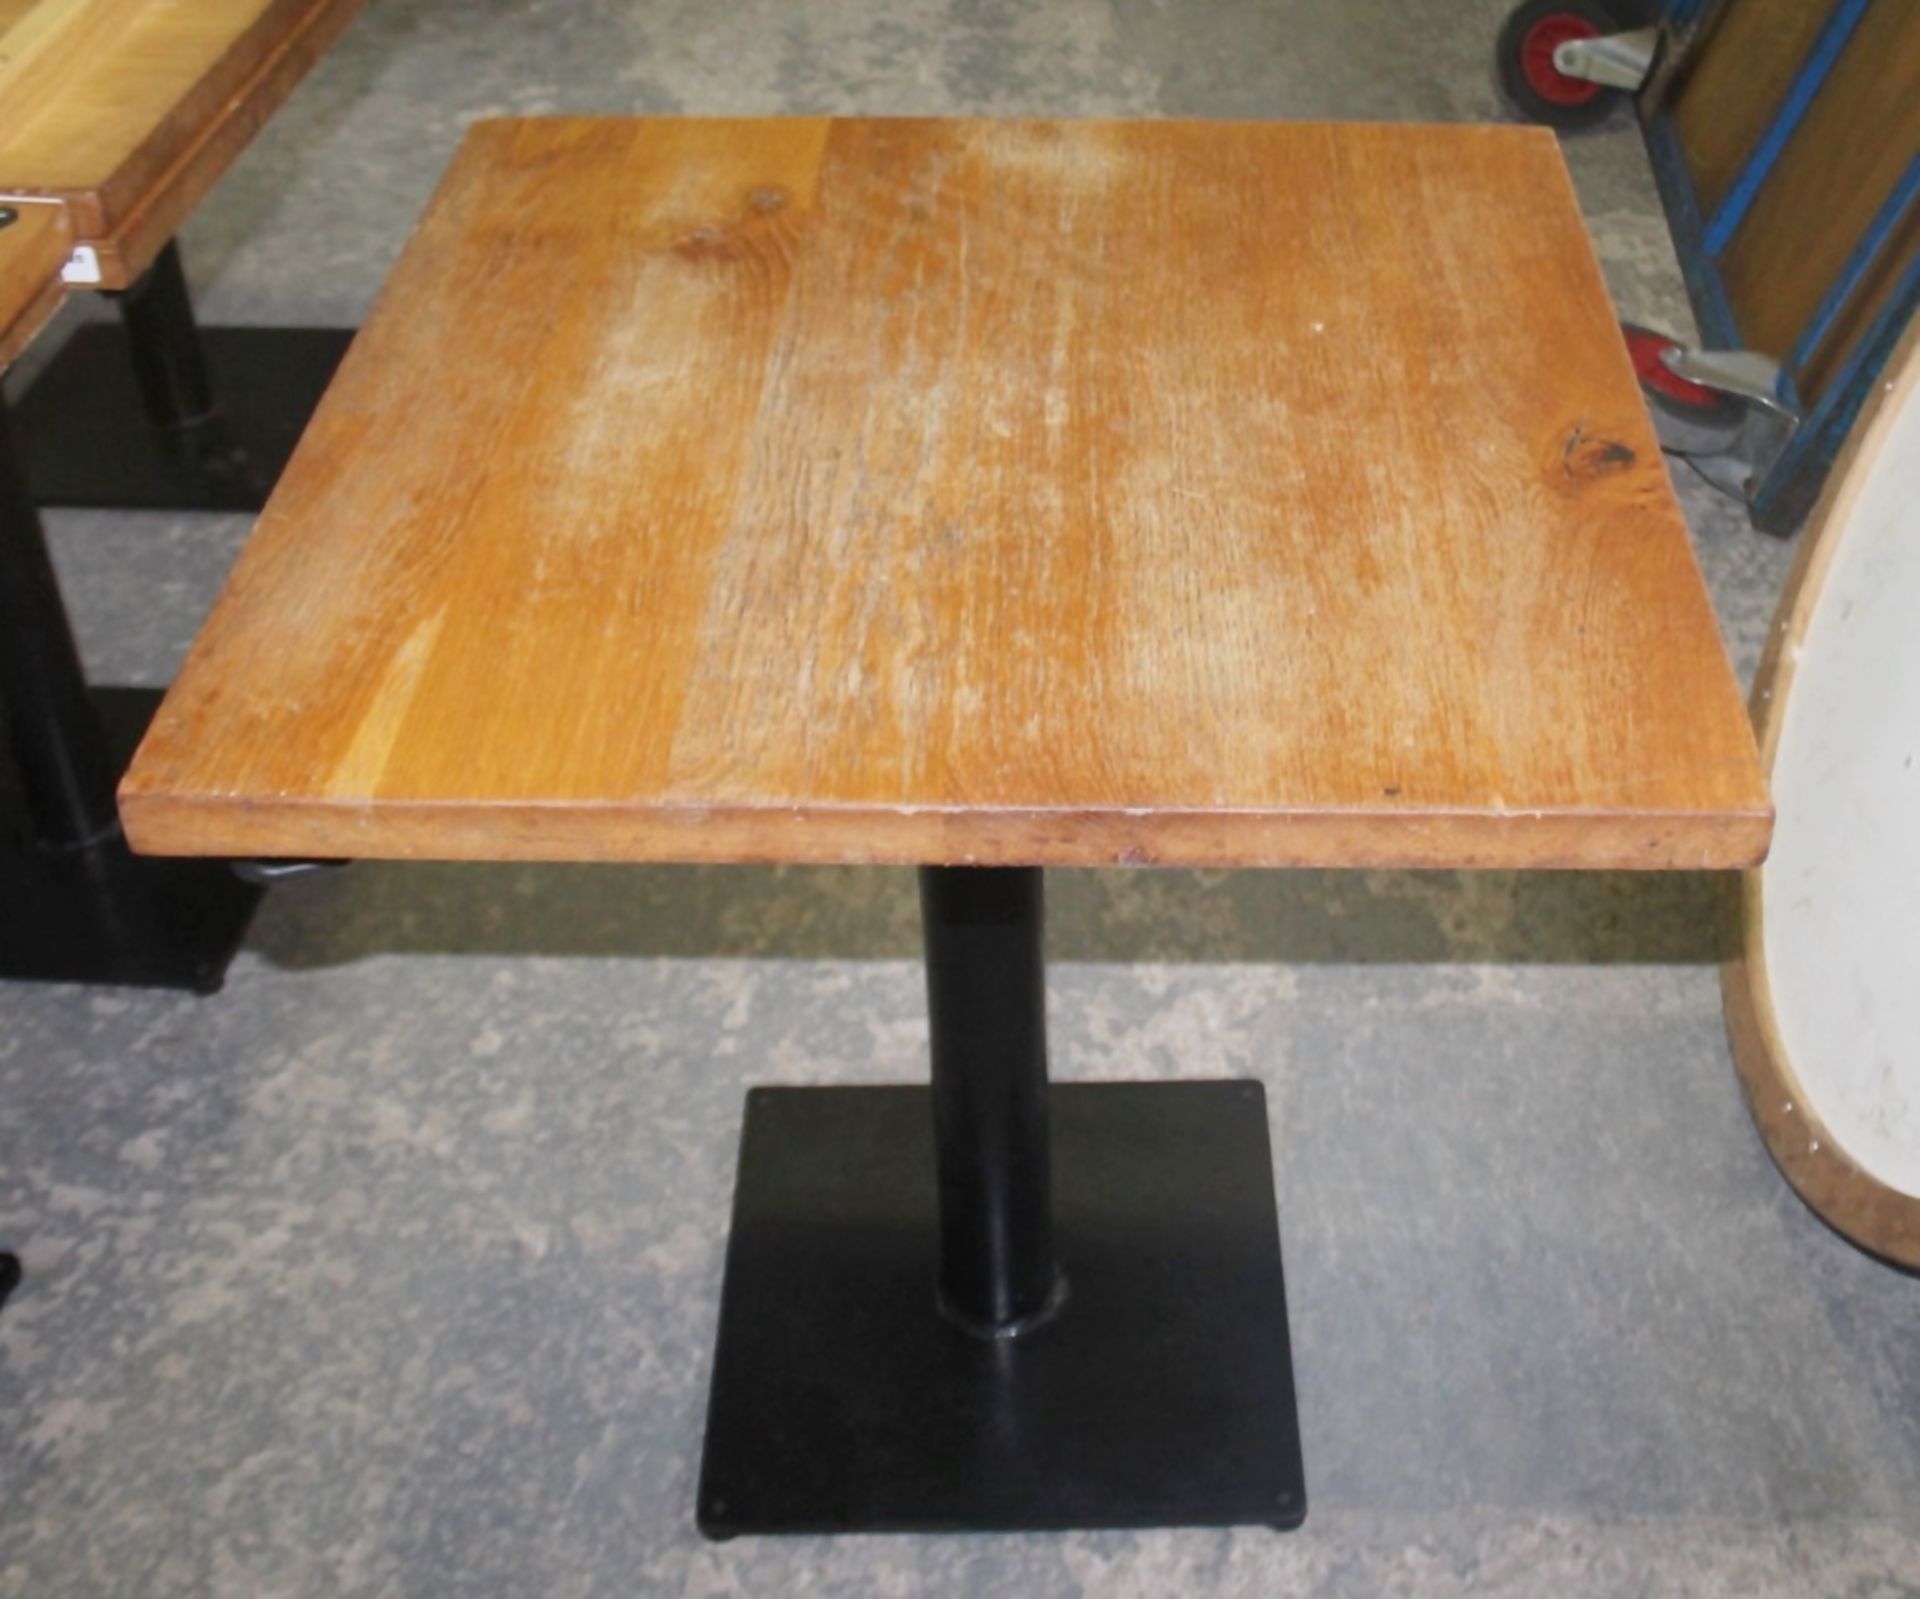 4 x Solid Oak Restaurant Dining Tables - Natural Rustic Knotty Oak Tops With Black Cast Iron Bases - - Image 4 of 7